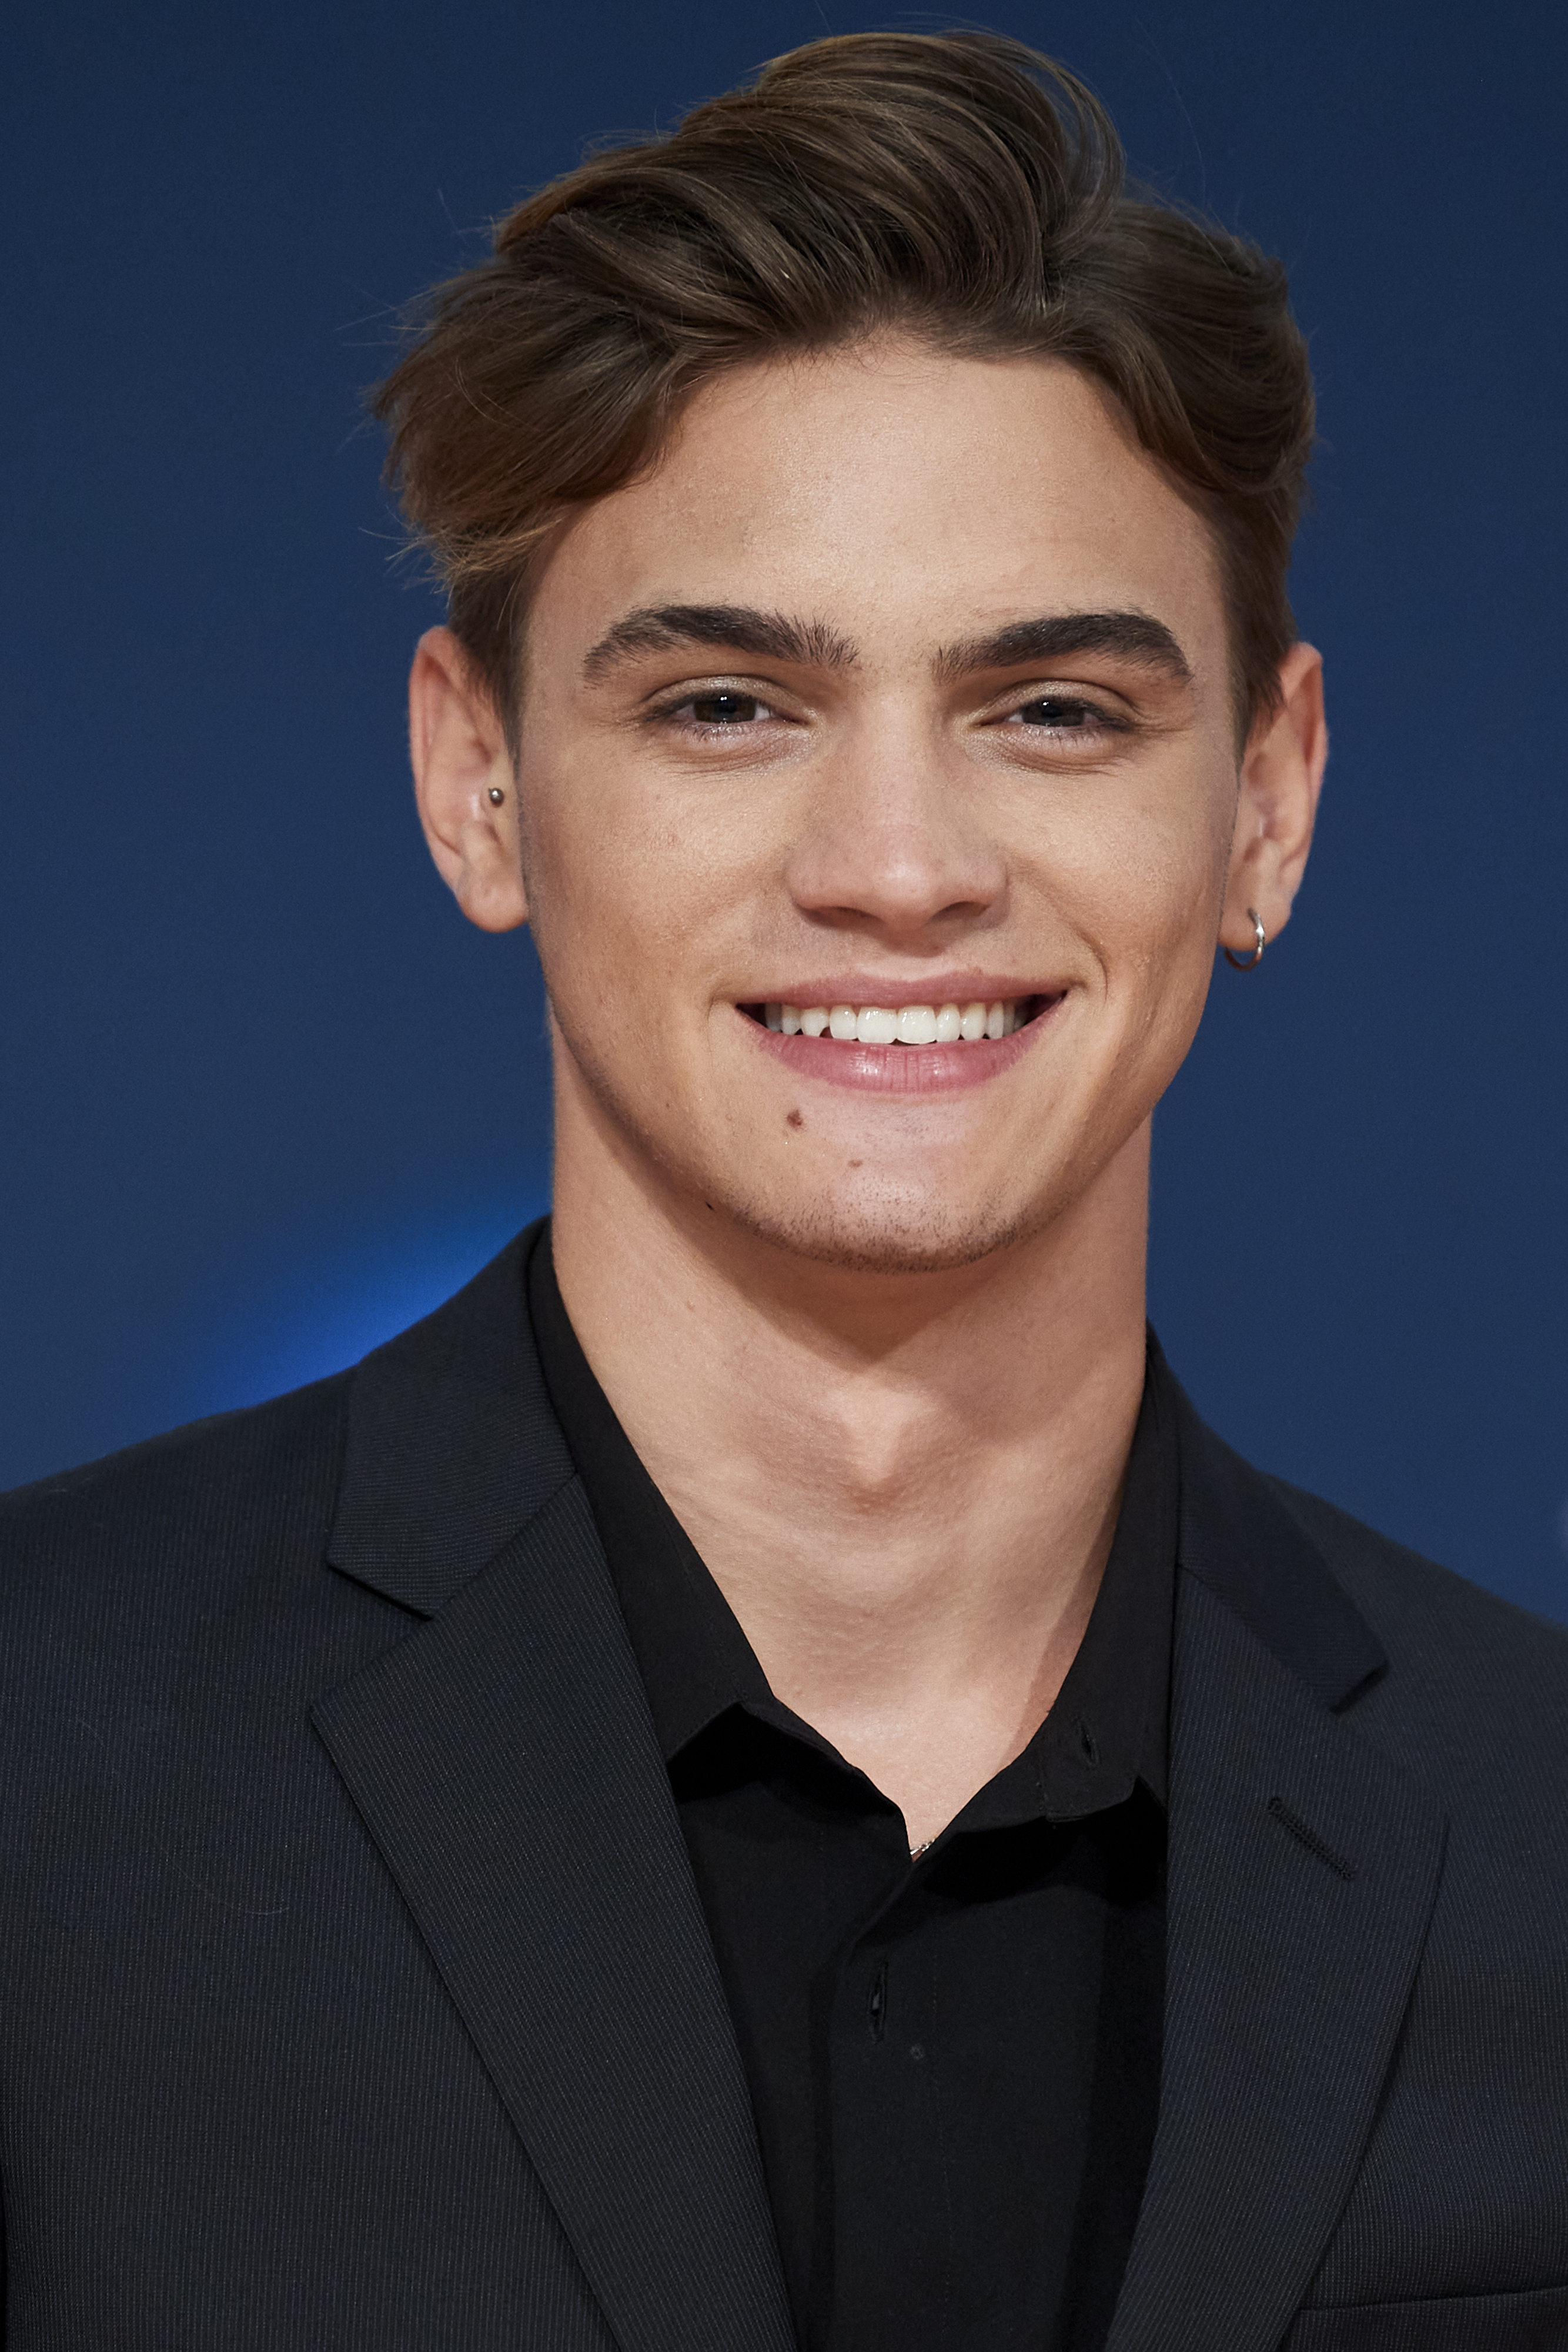 Gabriel Guevara at the premiere of "Hit" on September 1, 2020, in Vitoria-Gasteiz, Spain. | Source: Getty Images